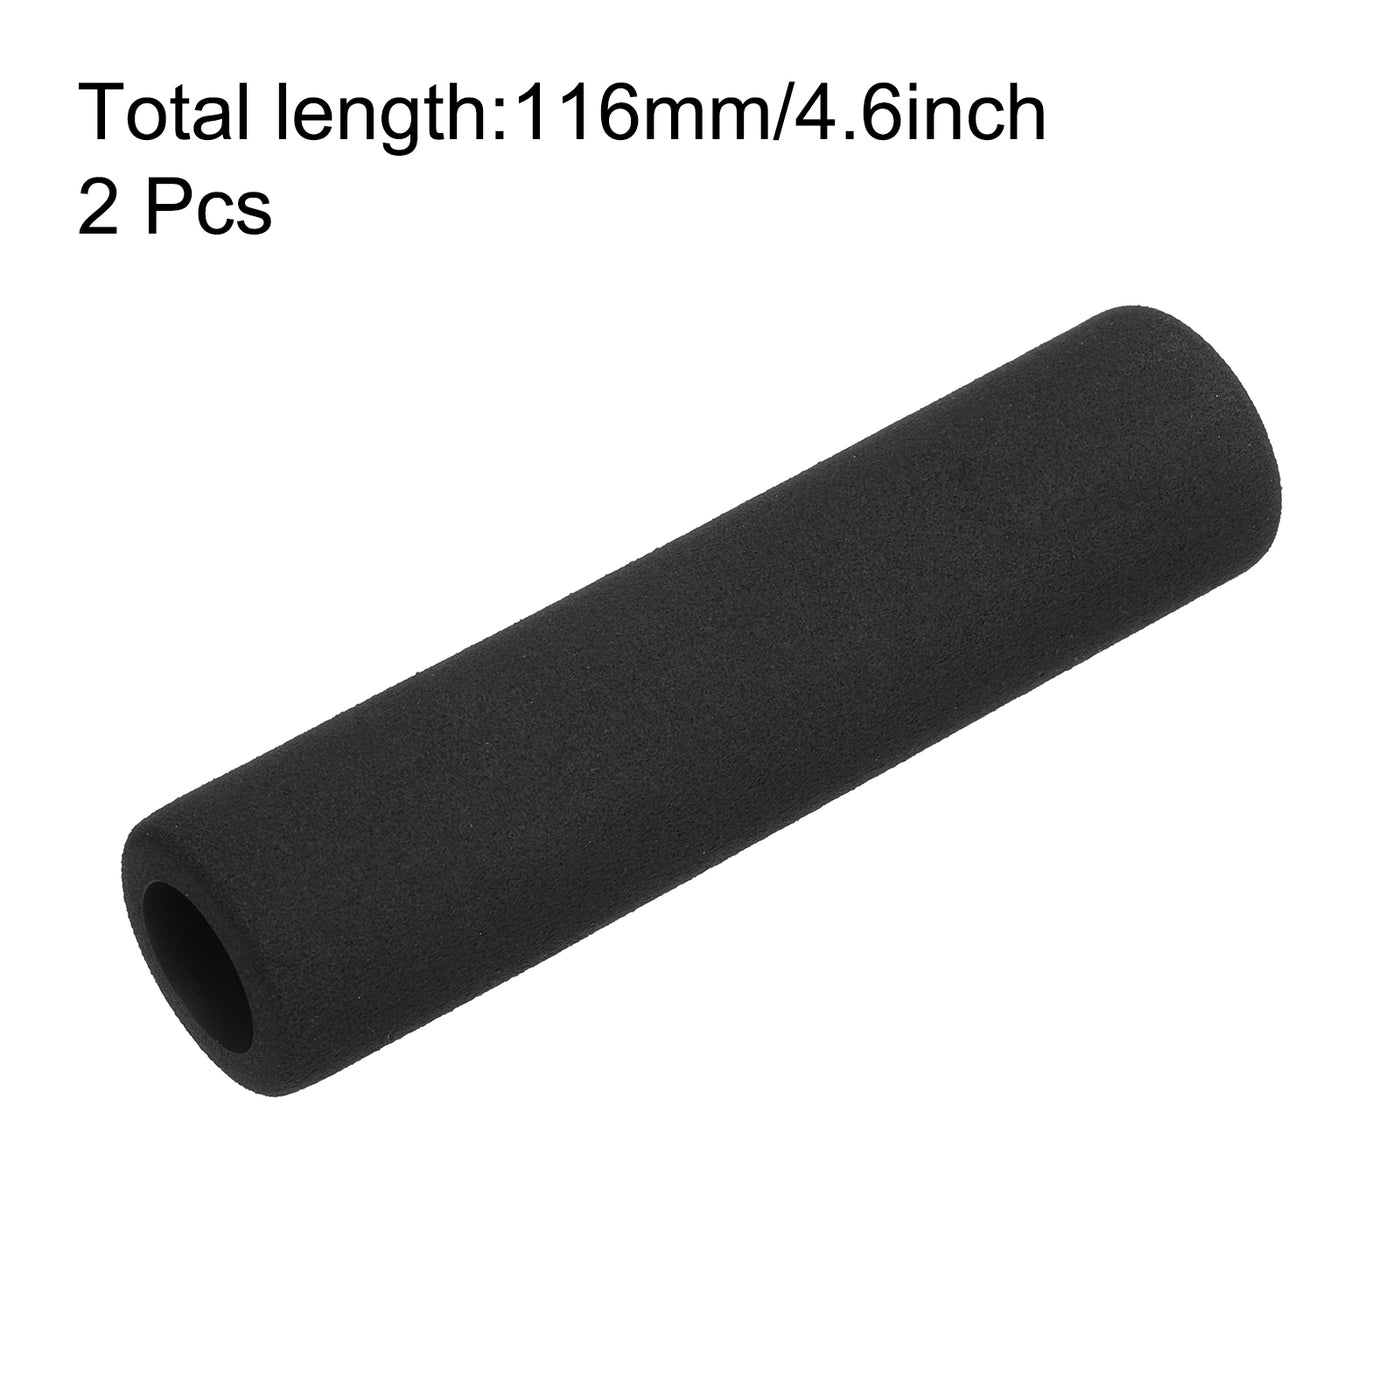 uxcell Uxcell Pipe Insulation Tube Foam Tubing for Handle Grip Support 17mm ID 27mm OD 116mm Heat Preservation Black 2pcs